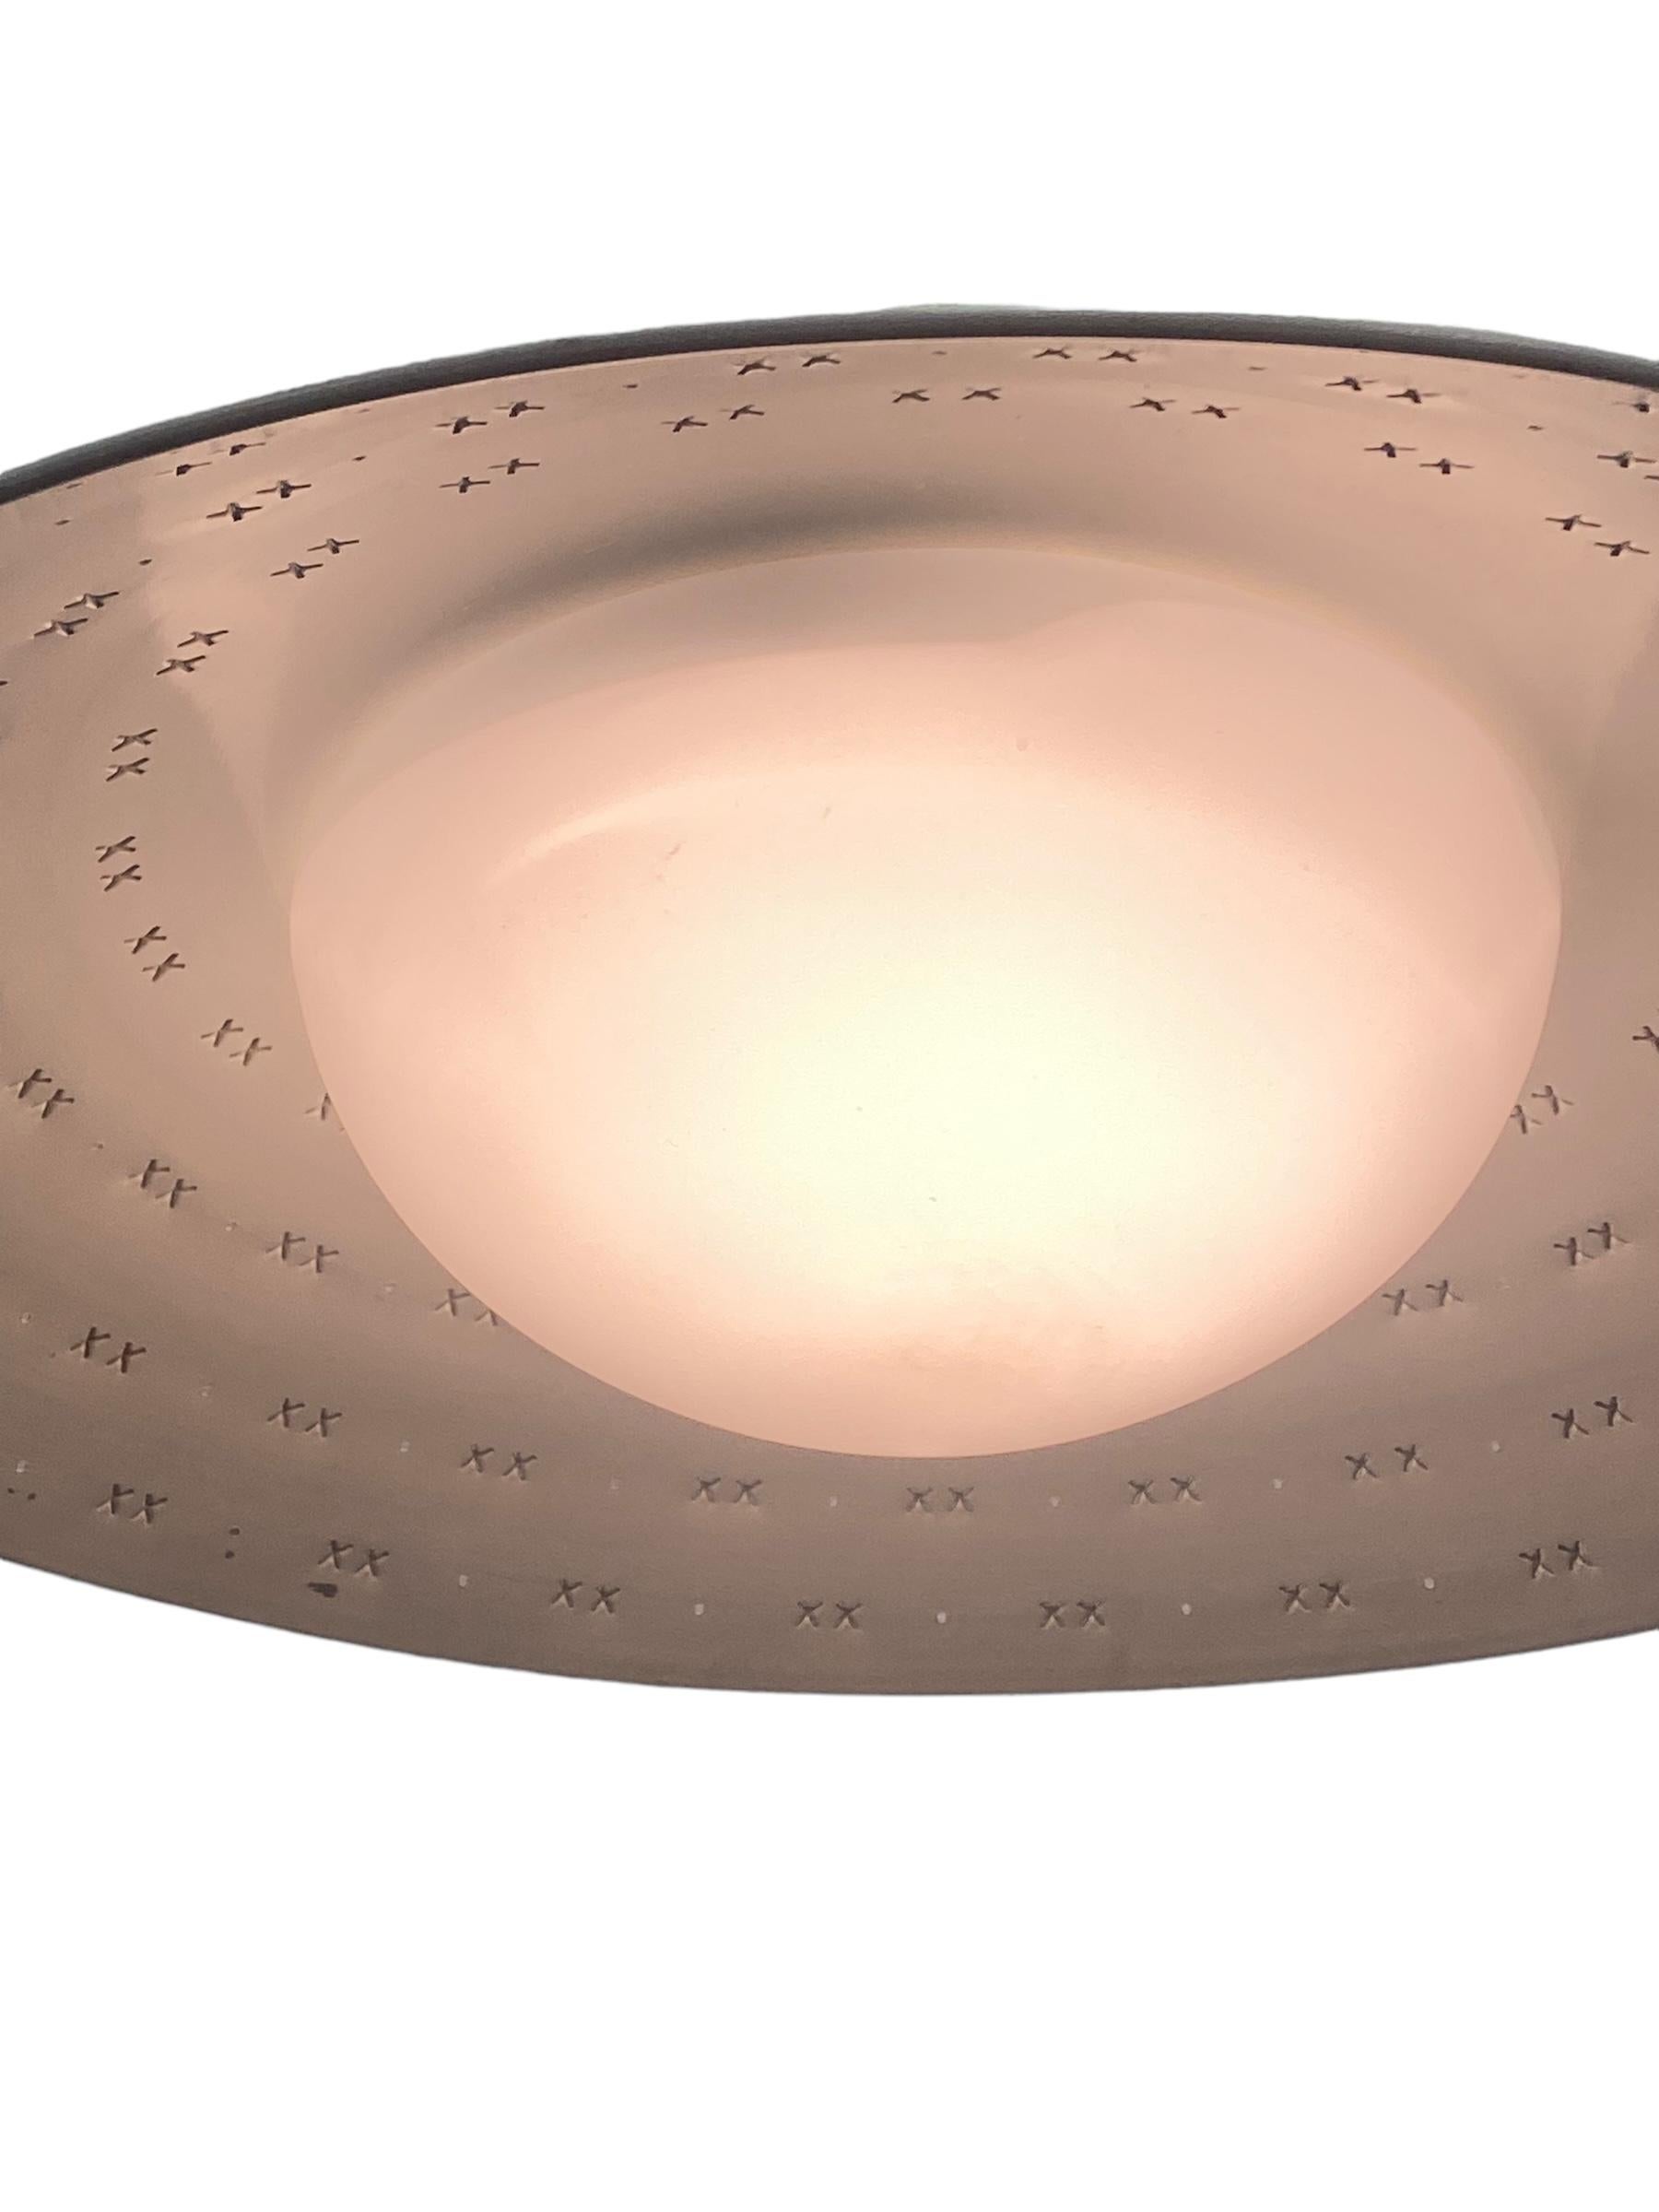 Mid-20th Century A Rare Lisa-Johansson Pape Ceiling Lamp FN 03-433, Orno 1950s For Sale